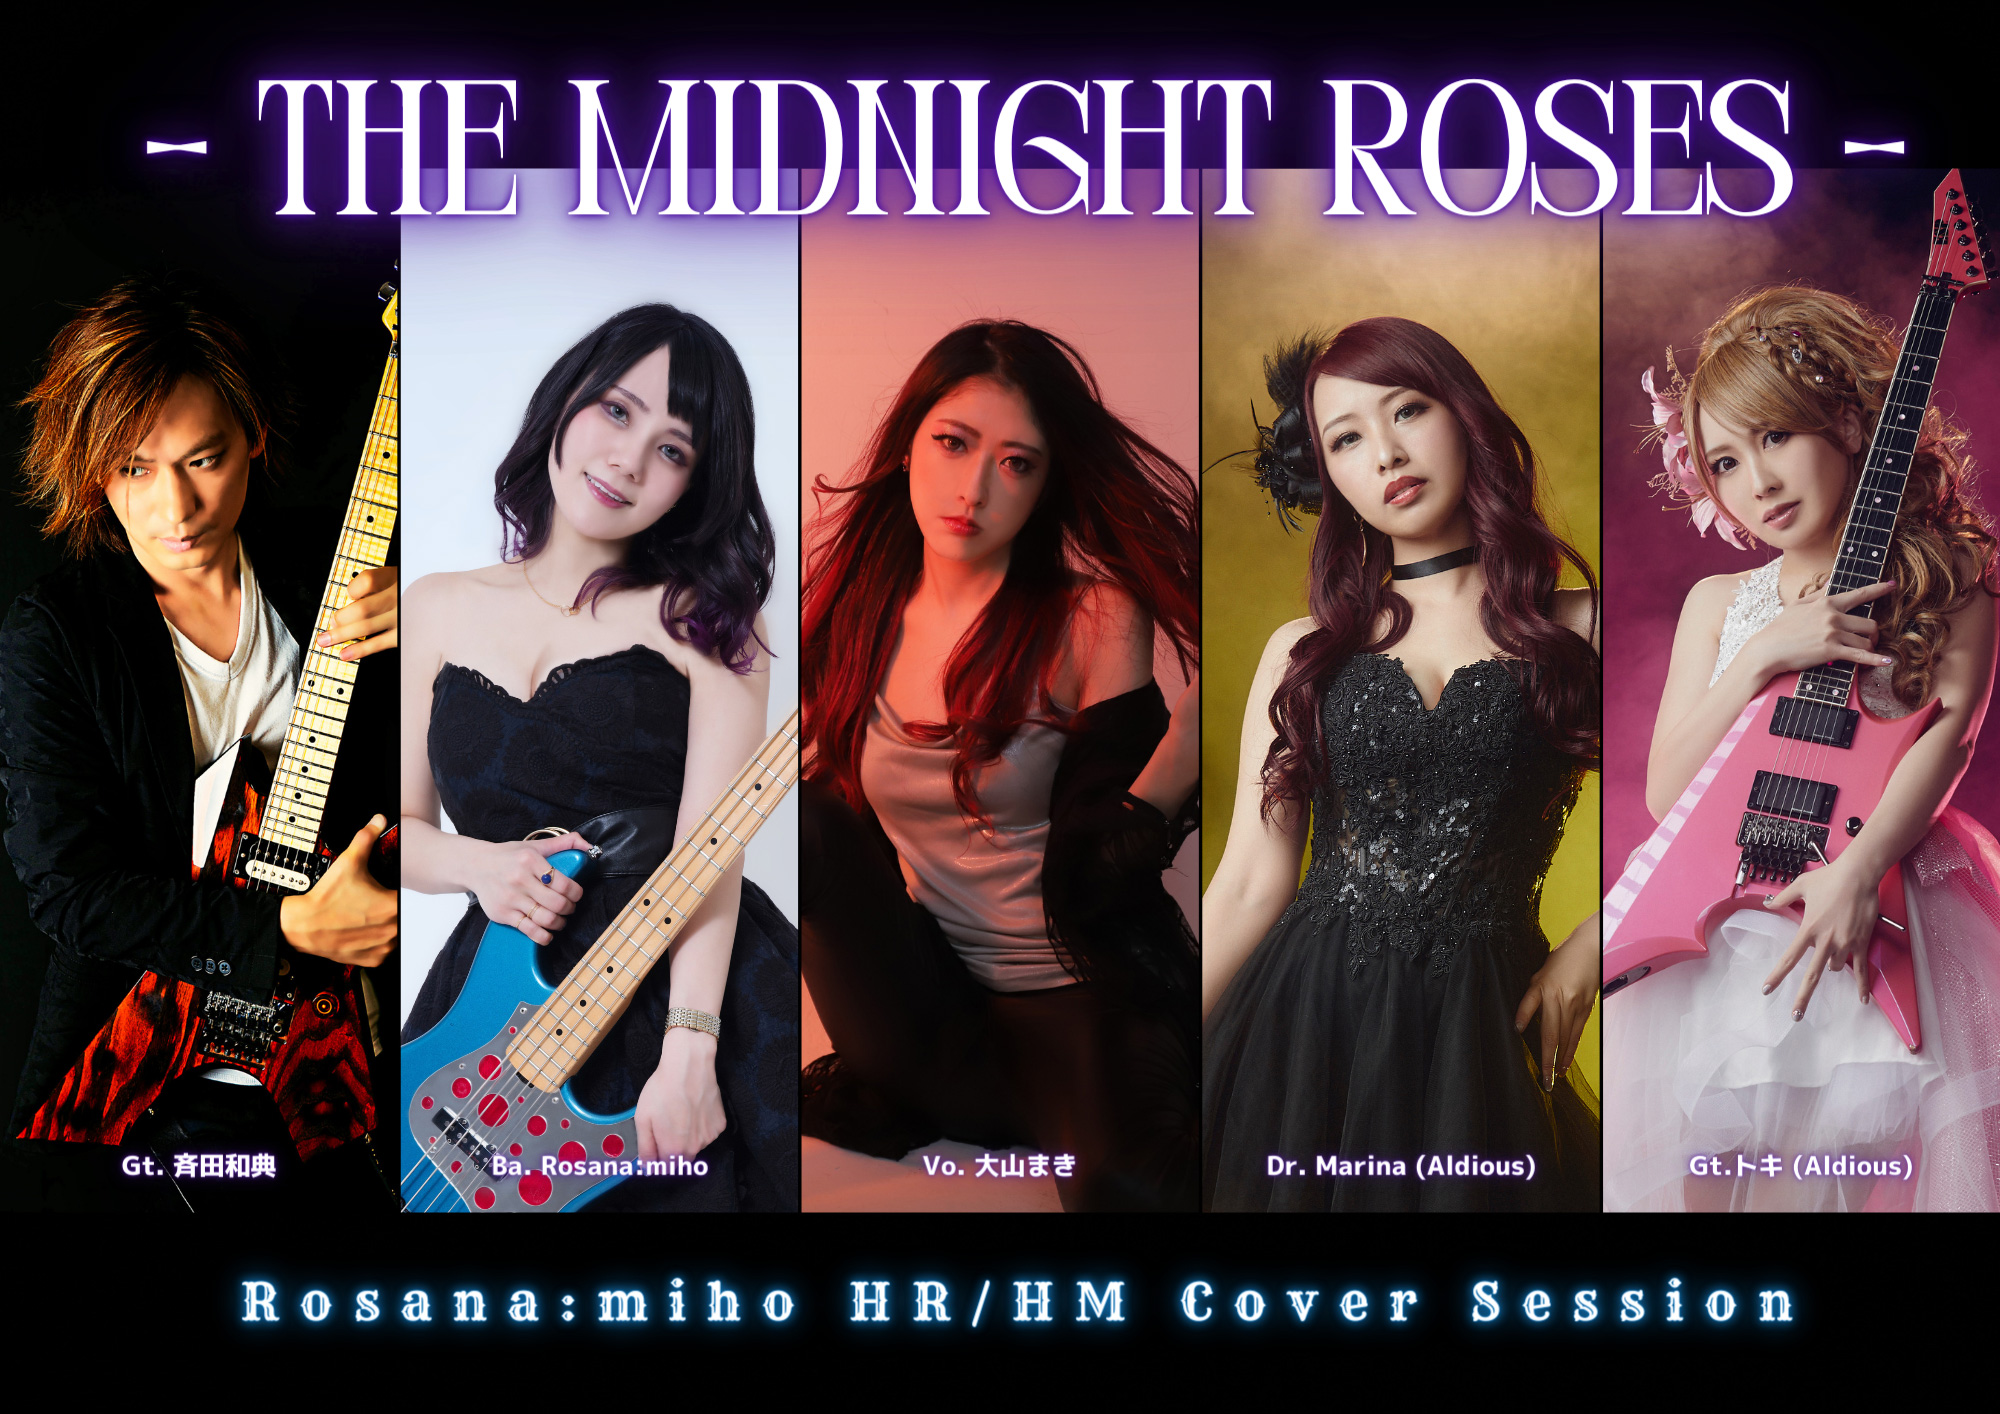 THE MIDNIGHT ROSES